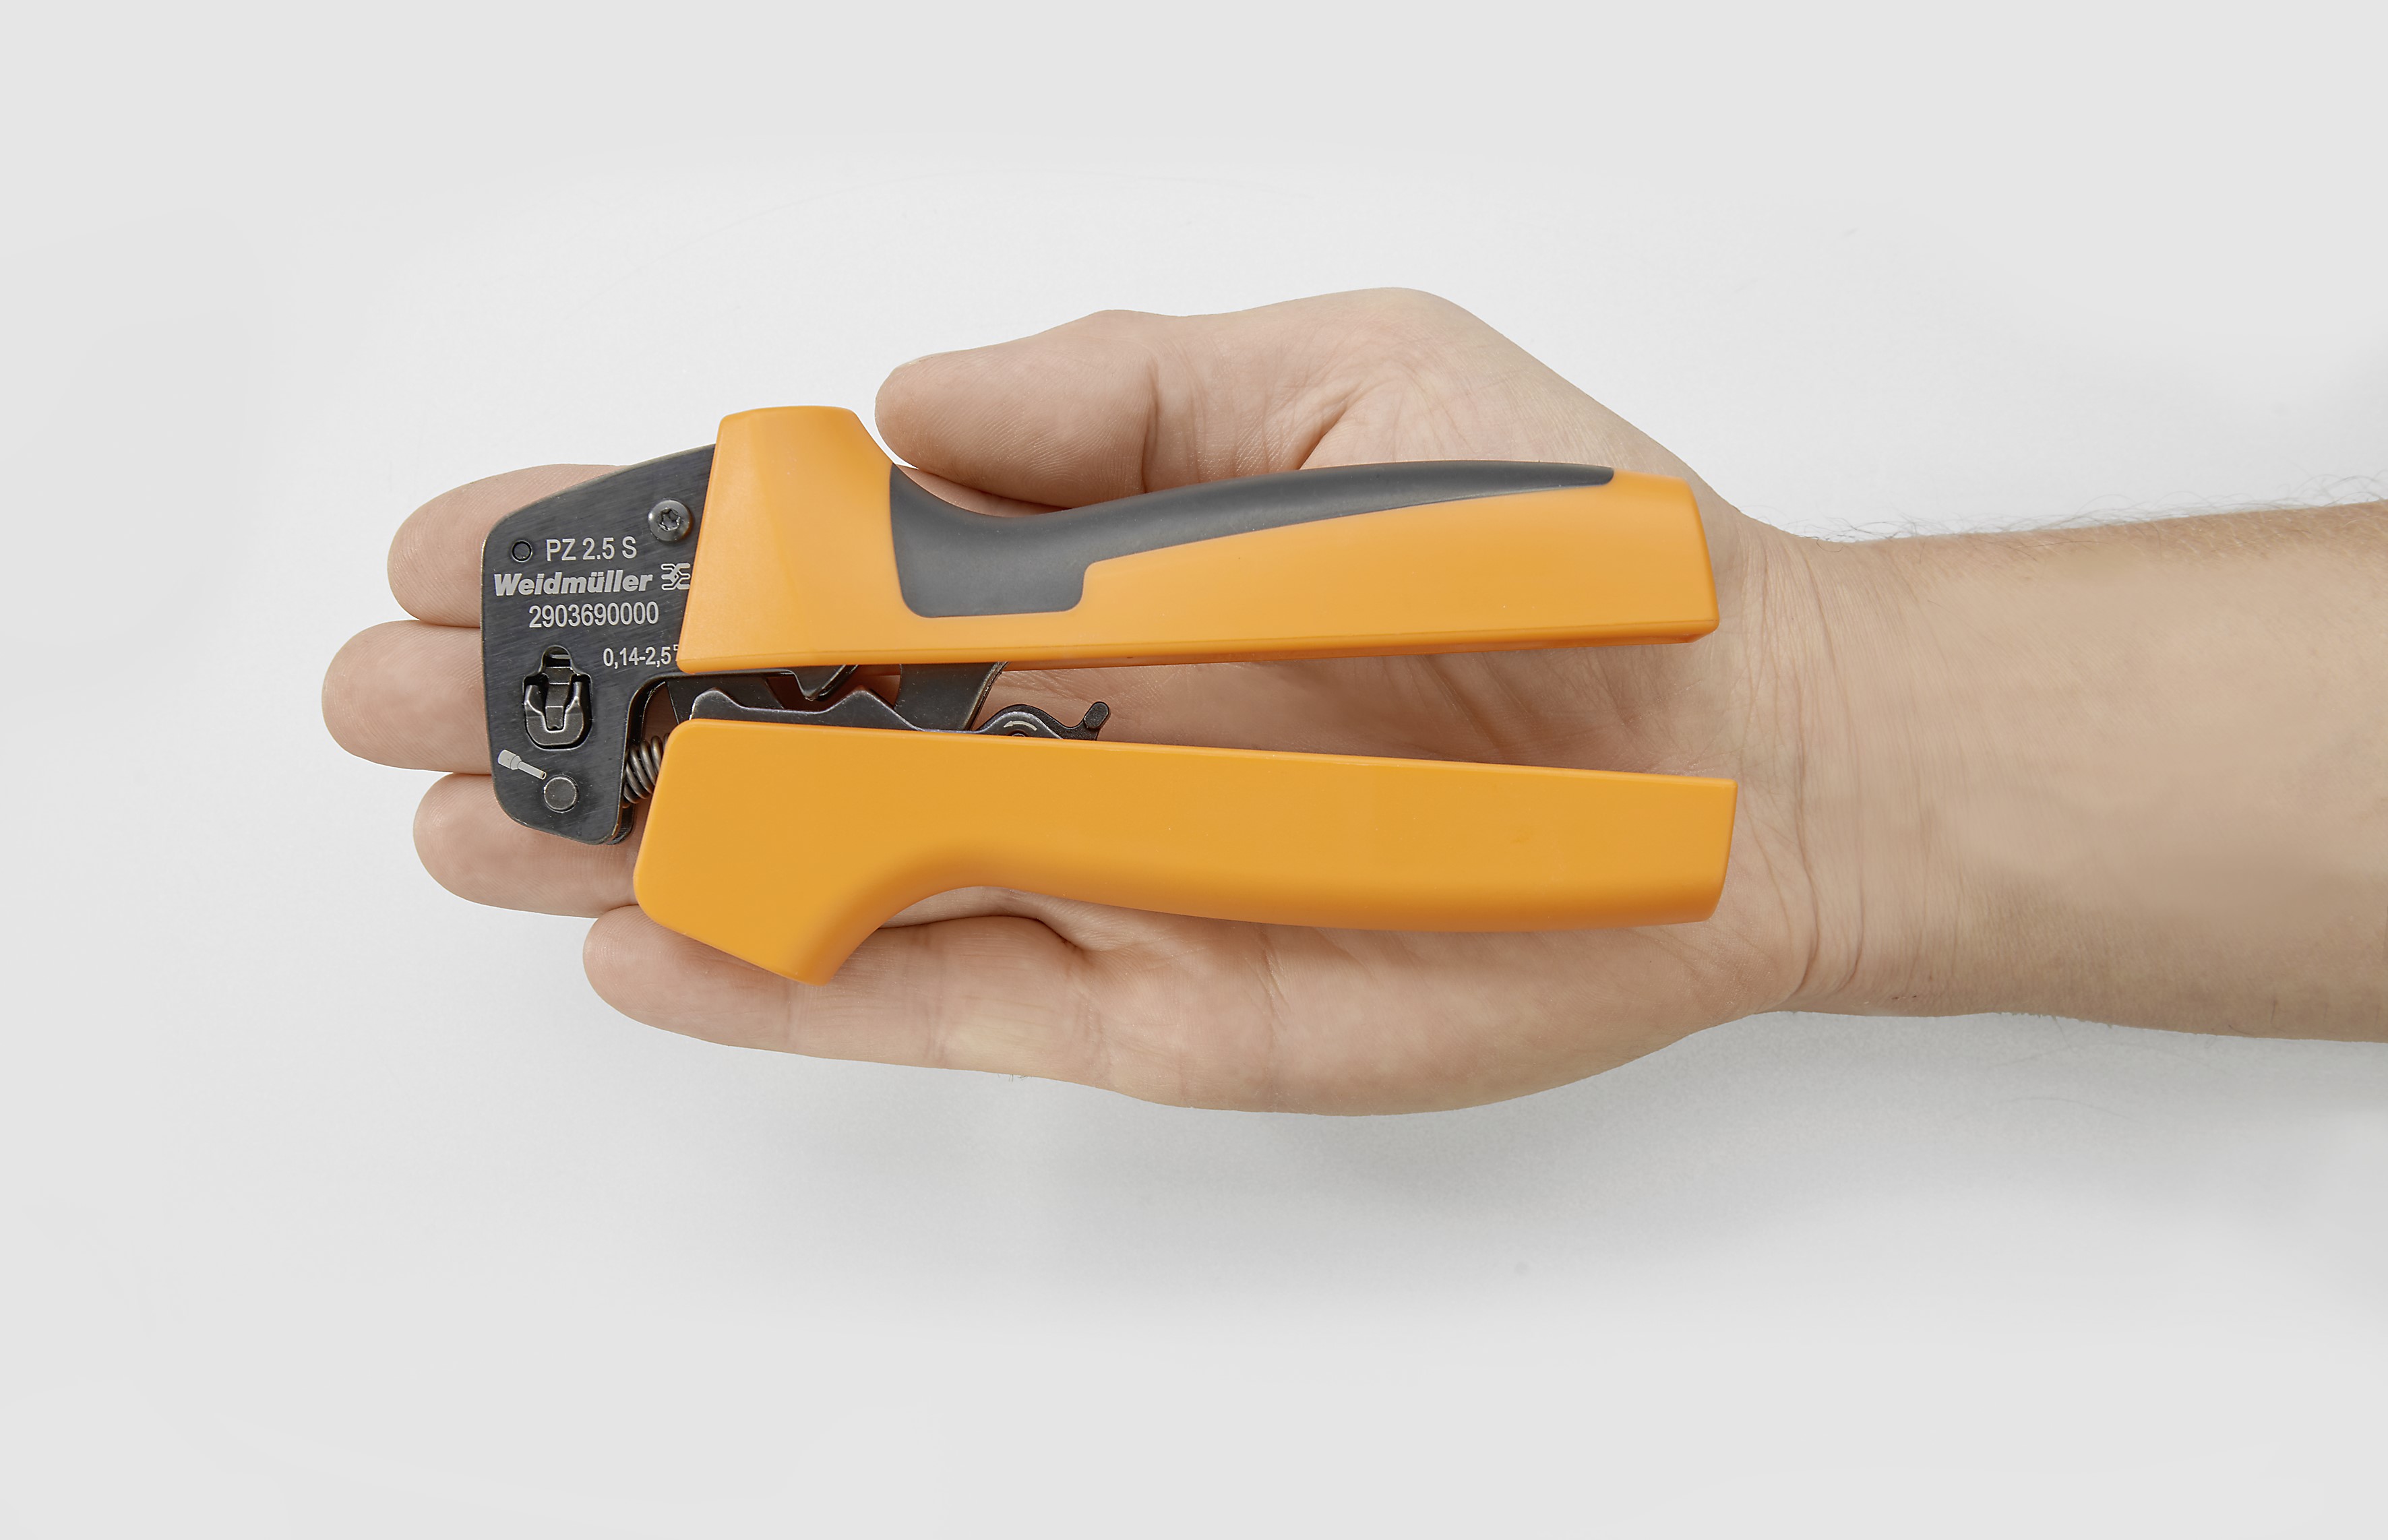 Small sized crimping tool